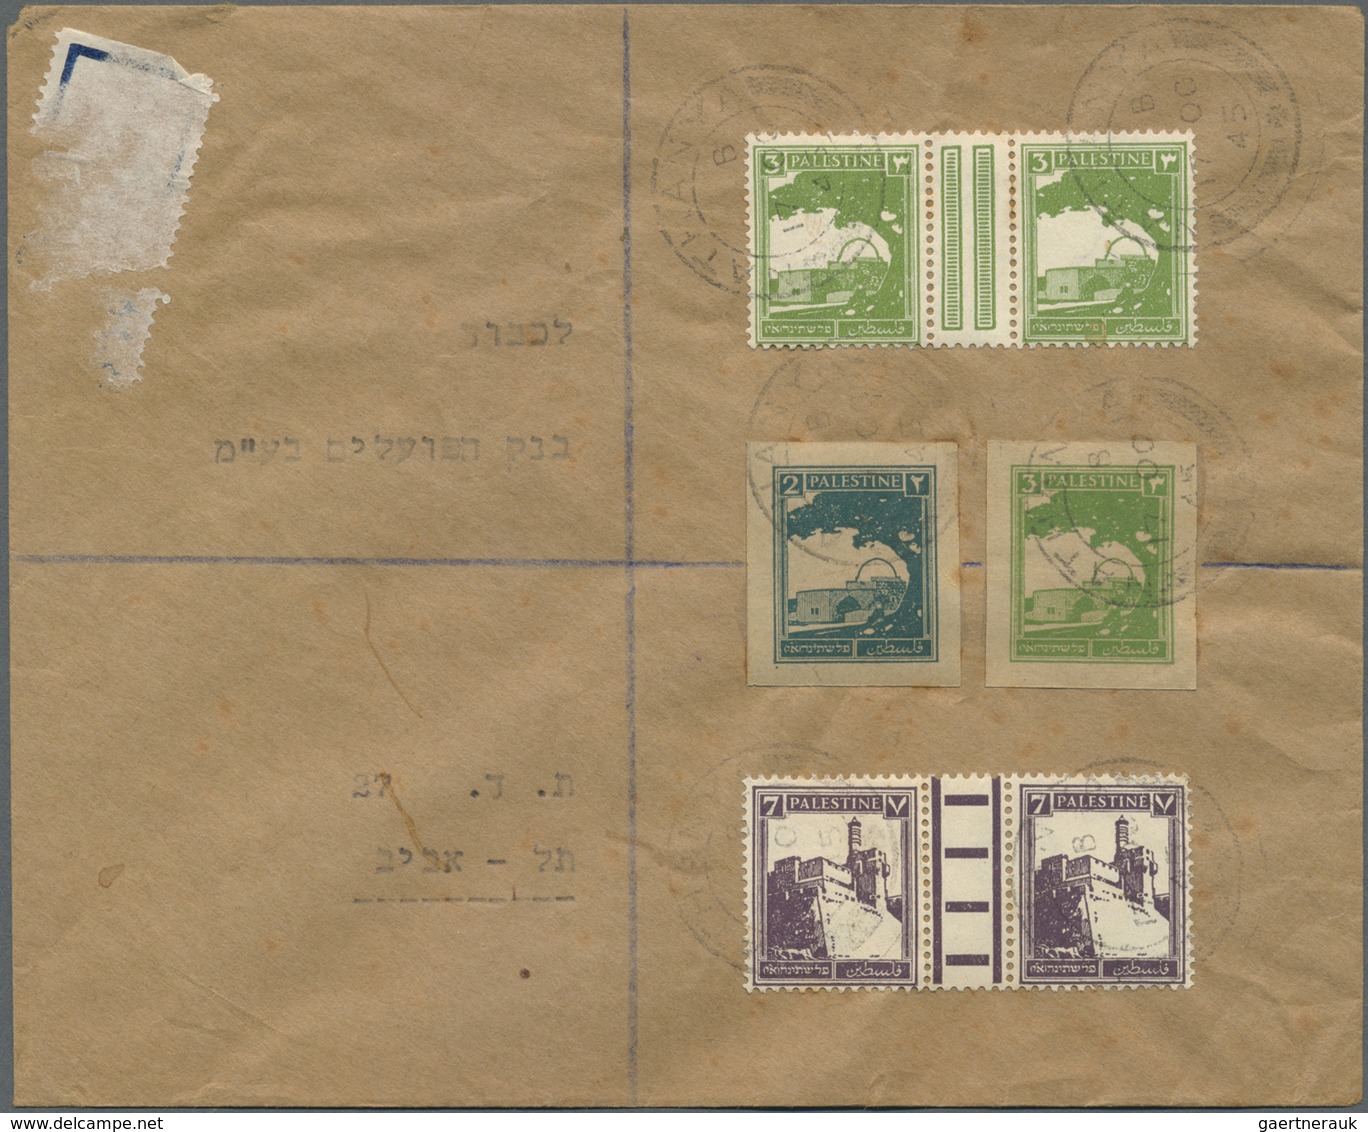 Br/GA Palästina: 1943/47, three covers used registered from Hadera with stationery cut-outs, also IRC repl